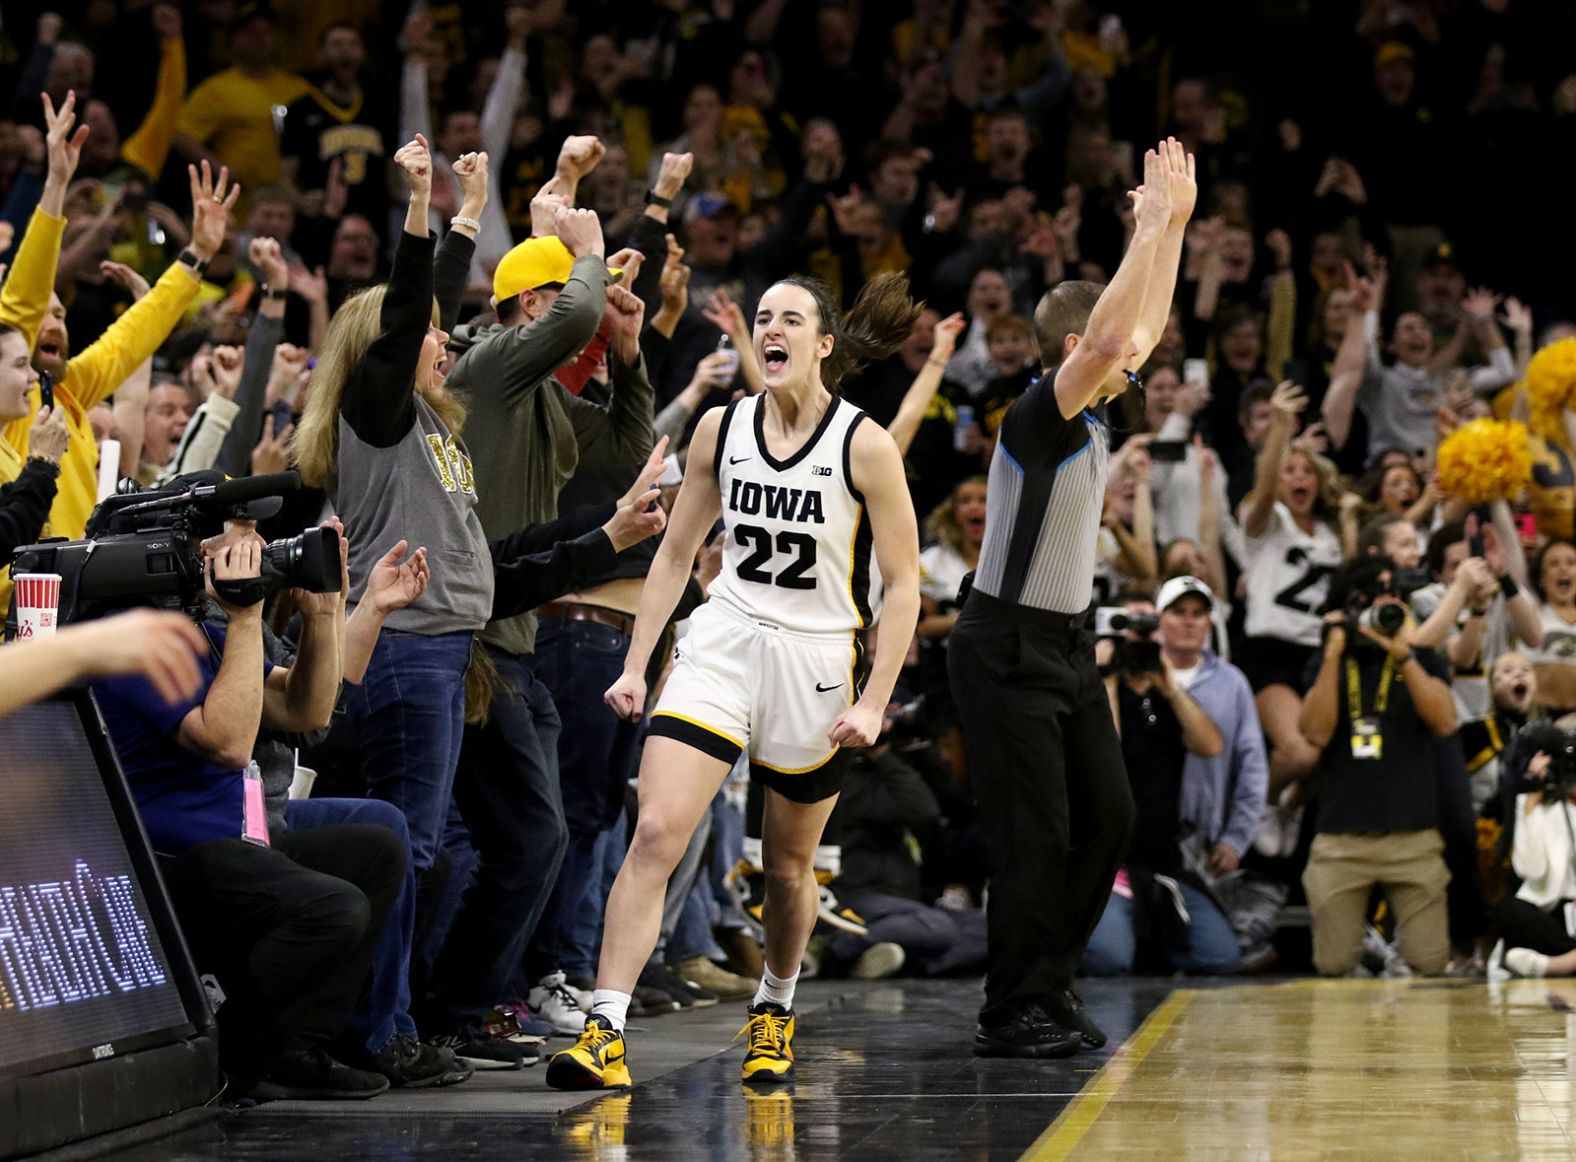 Iowa star Caitlin Clark celebrates after she hit a 3-pointer against Michigan <a href="index.php?page=&url=https%3A%2F%2Fwww.cnn.com%2F2024%2F02%2F15%2Fsport%2Fcaitlin-clark-ncaa-scoring-record-spt-intl%2Findex.html" target="_blank">to become the all-time leading scorer in NCAA women's basketball</a> on Thursday, February 15. Clark surpassed the previous record of 3,527 career points, which was set by Kelsey Plum.